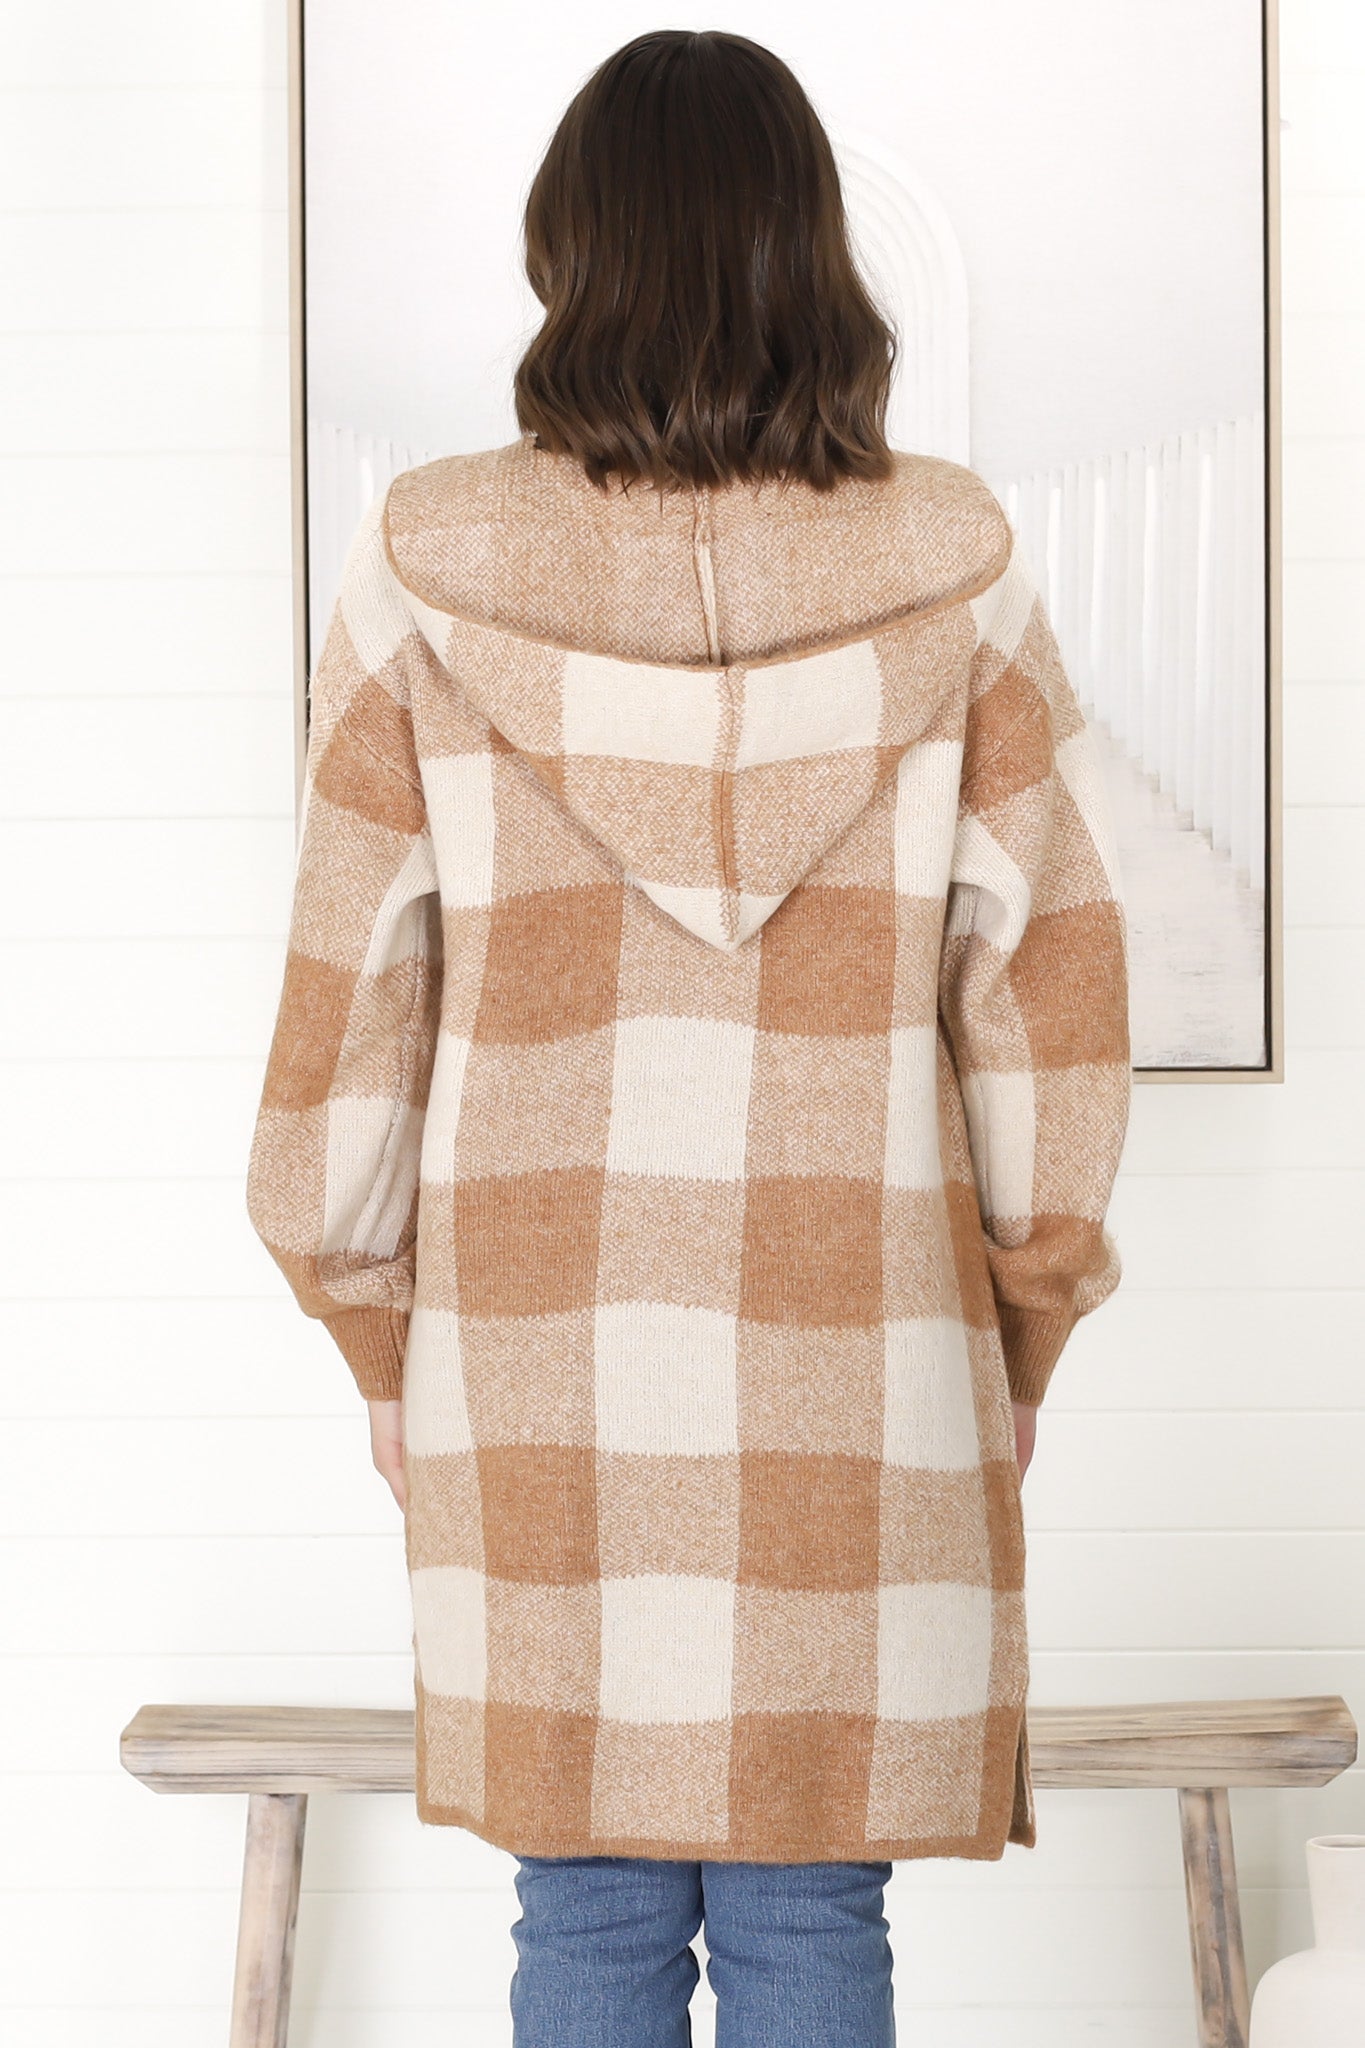 Nowel Cardigan - Hooded Checkered Cardigan with Pockets in Caramel